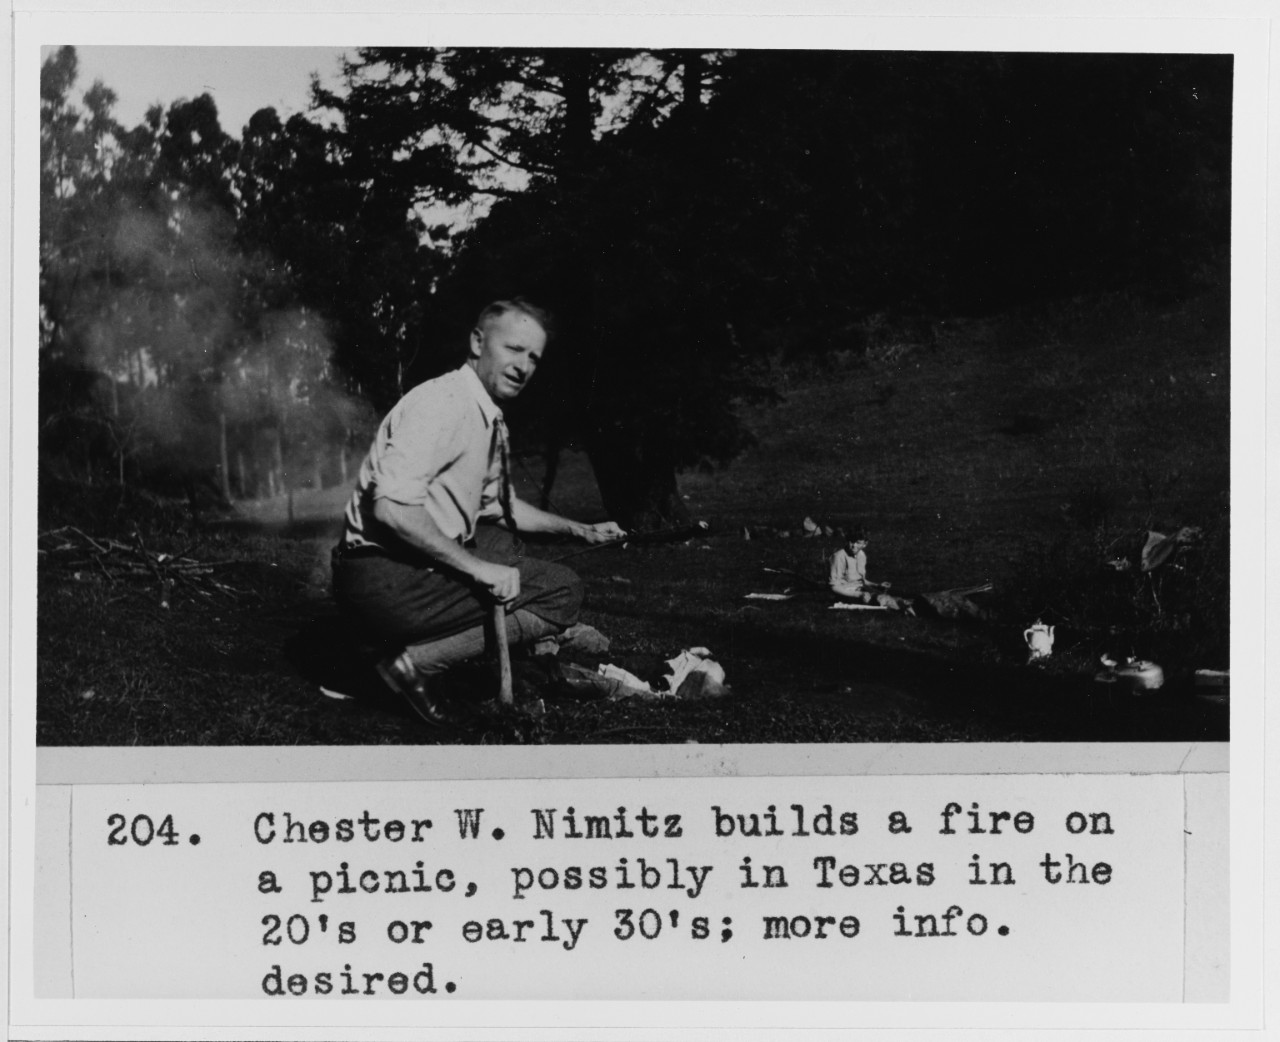 Chester W. Nimitz Builds a Fire while on a Picnic